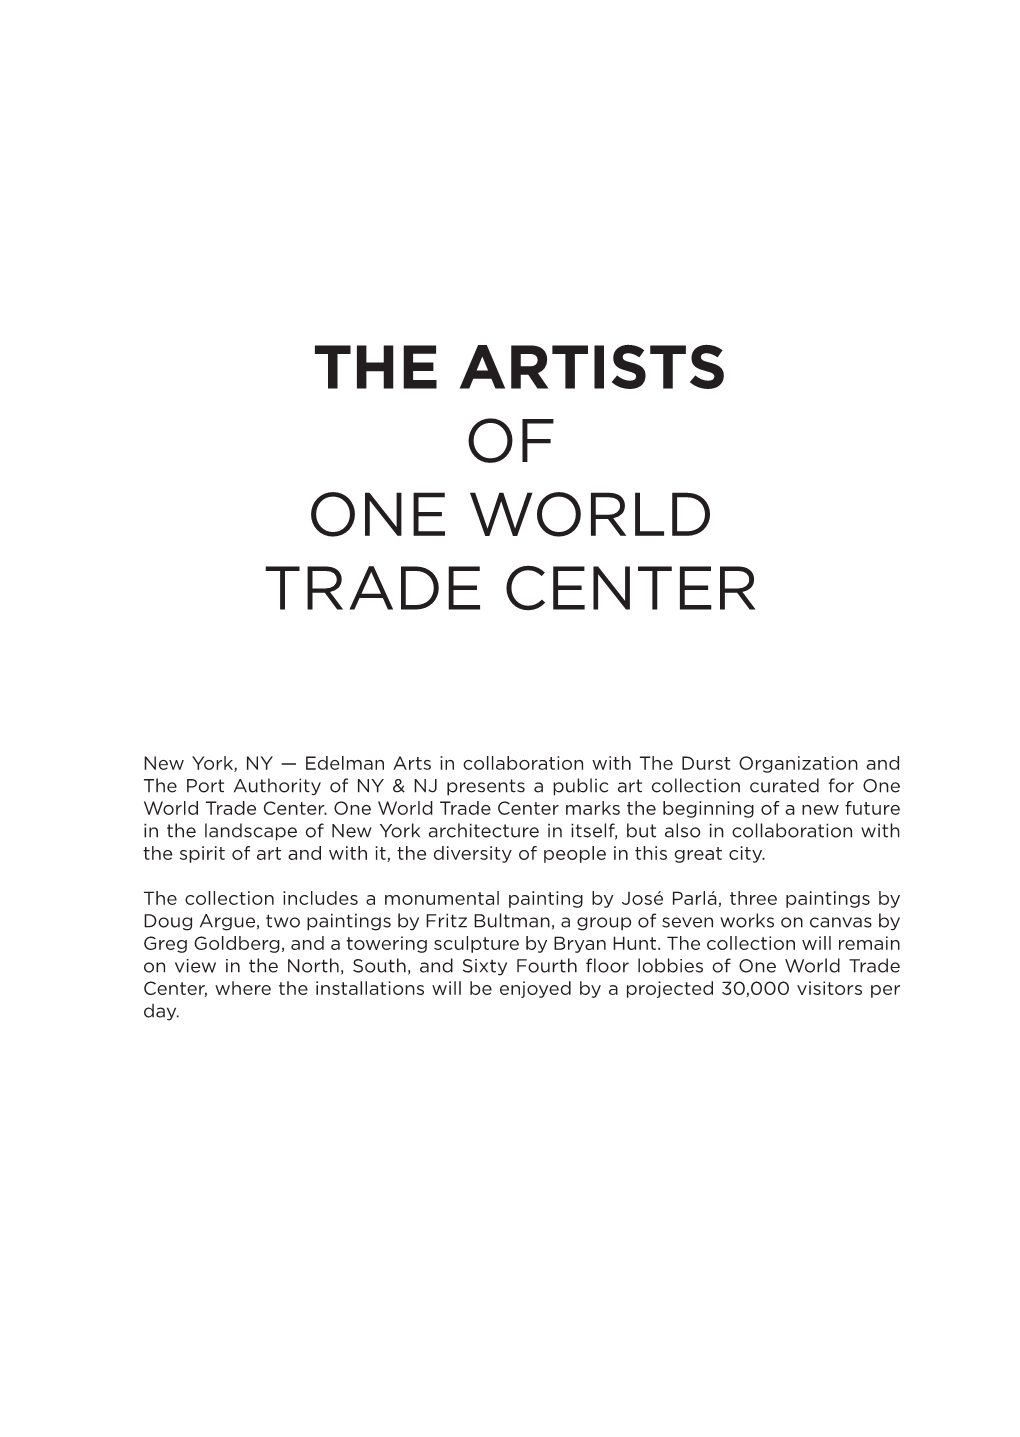 The Artists of One World Trade Center